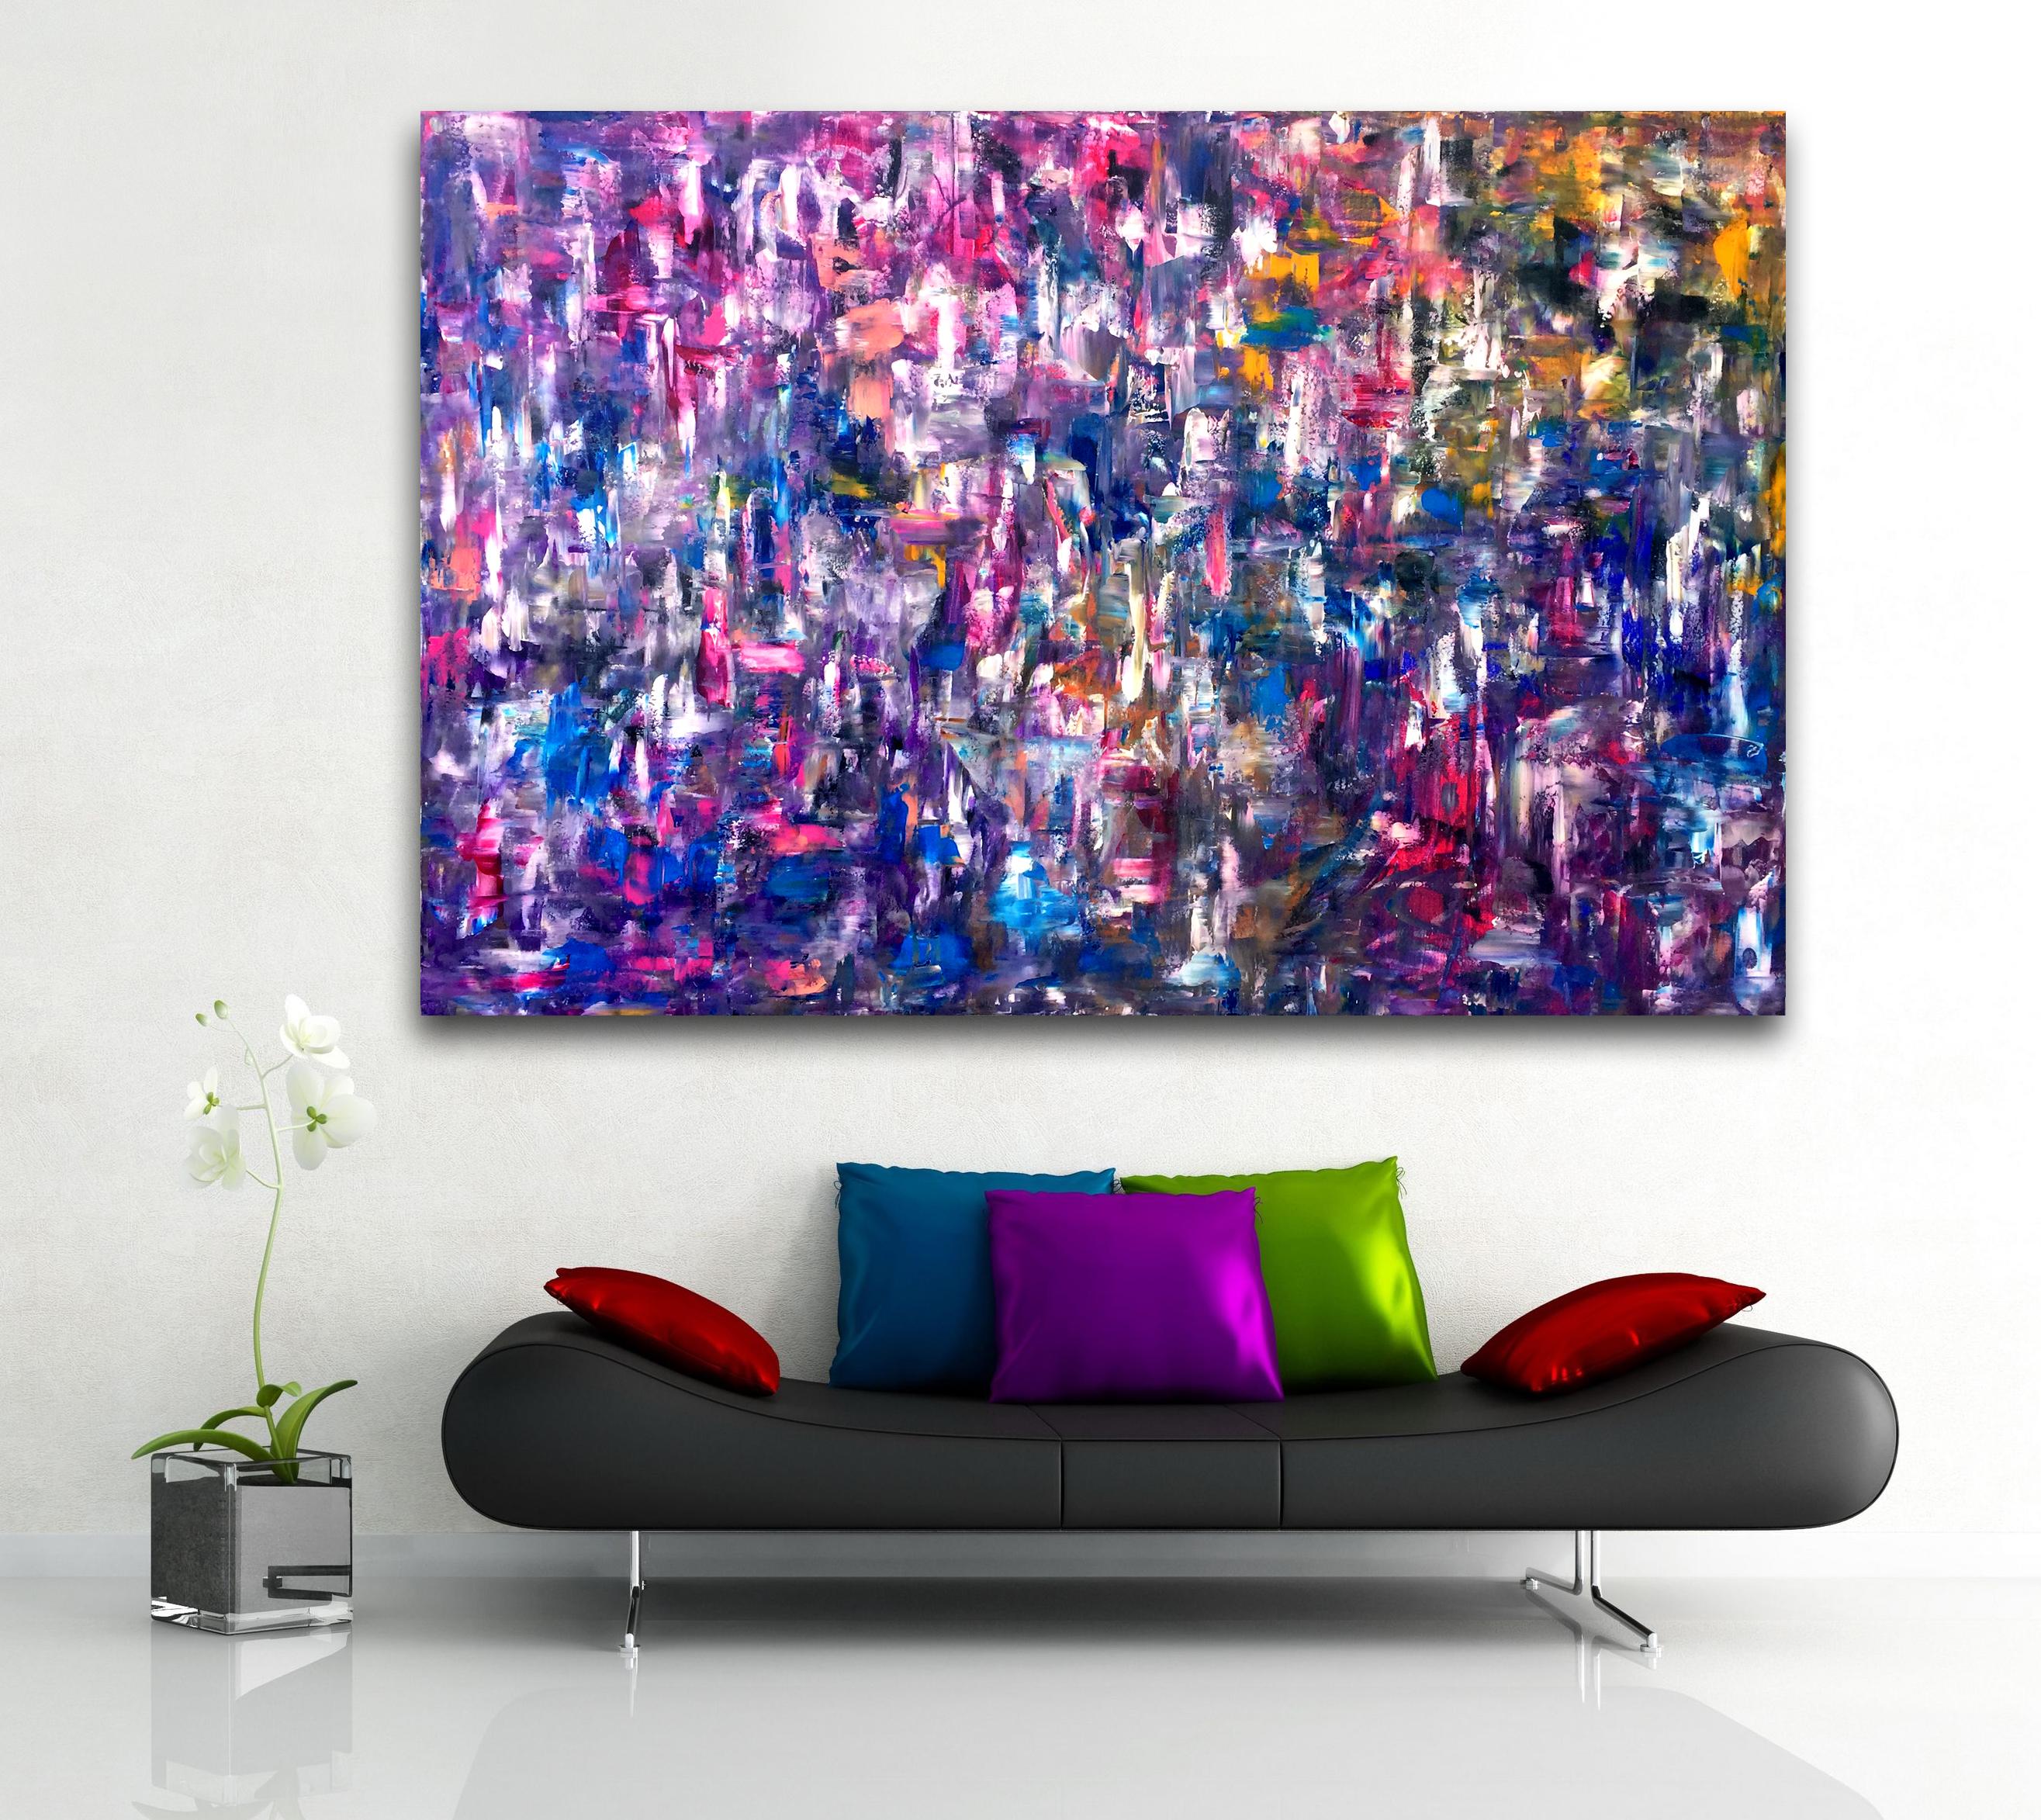 The Crush - Abstract Expressionist Painting by Estelle Asmodelle